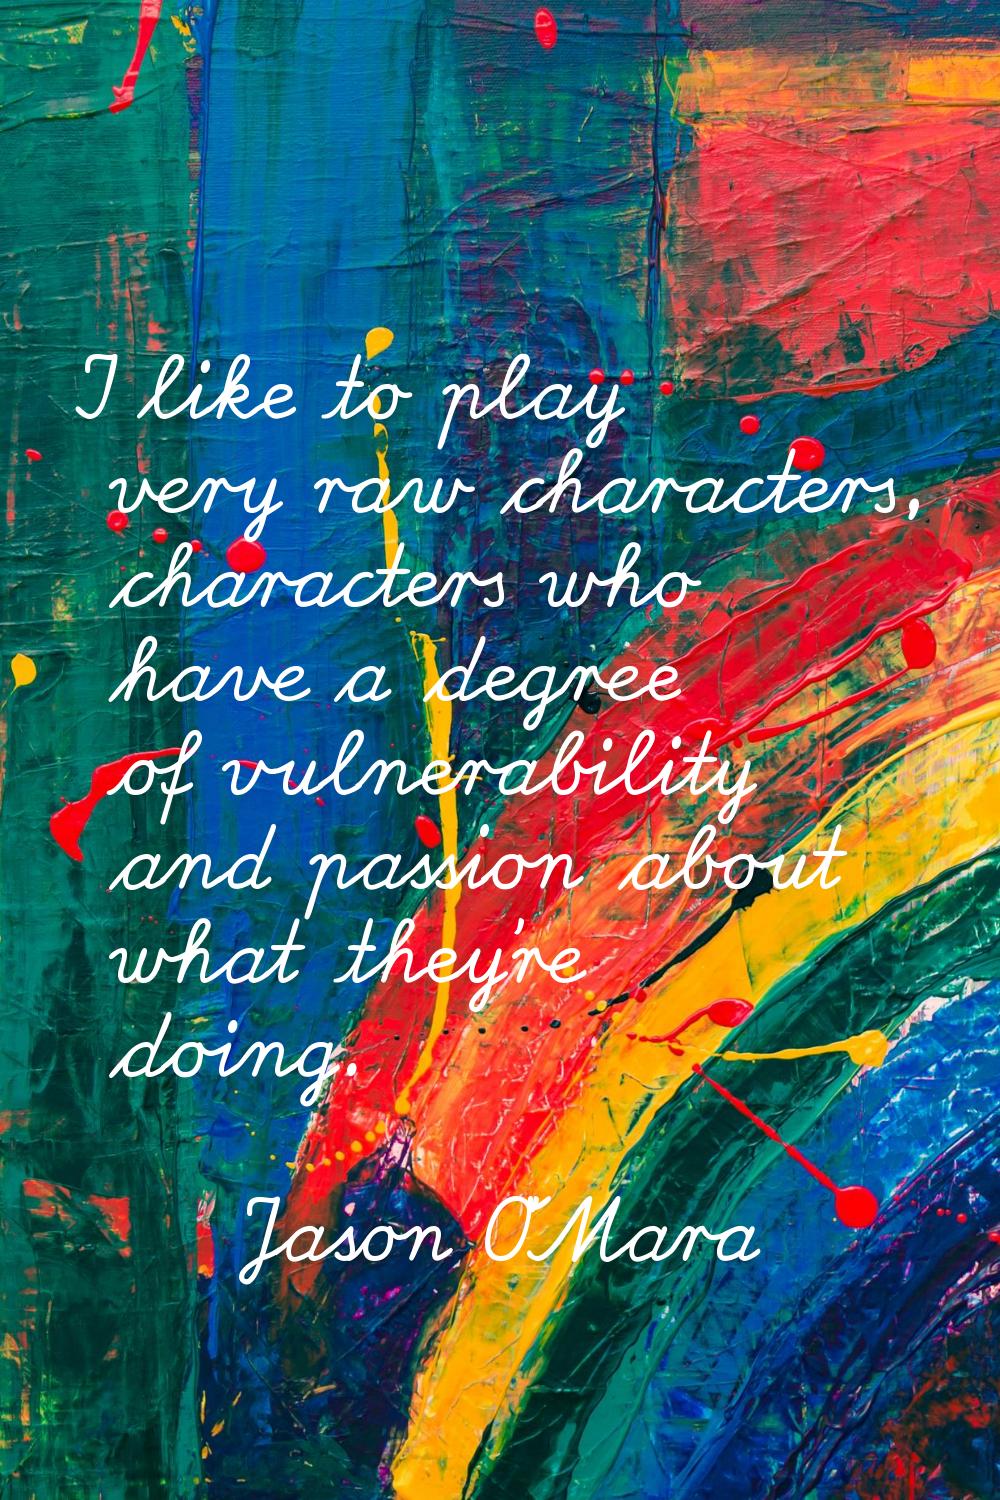 I like to play very raw characters, characters who have a degree of vulnerability and passion about